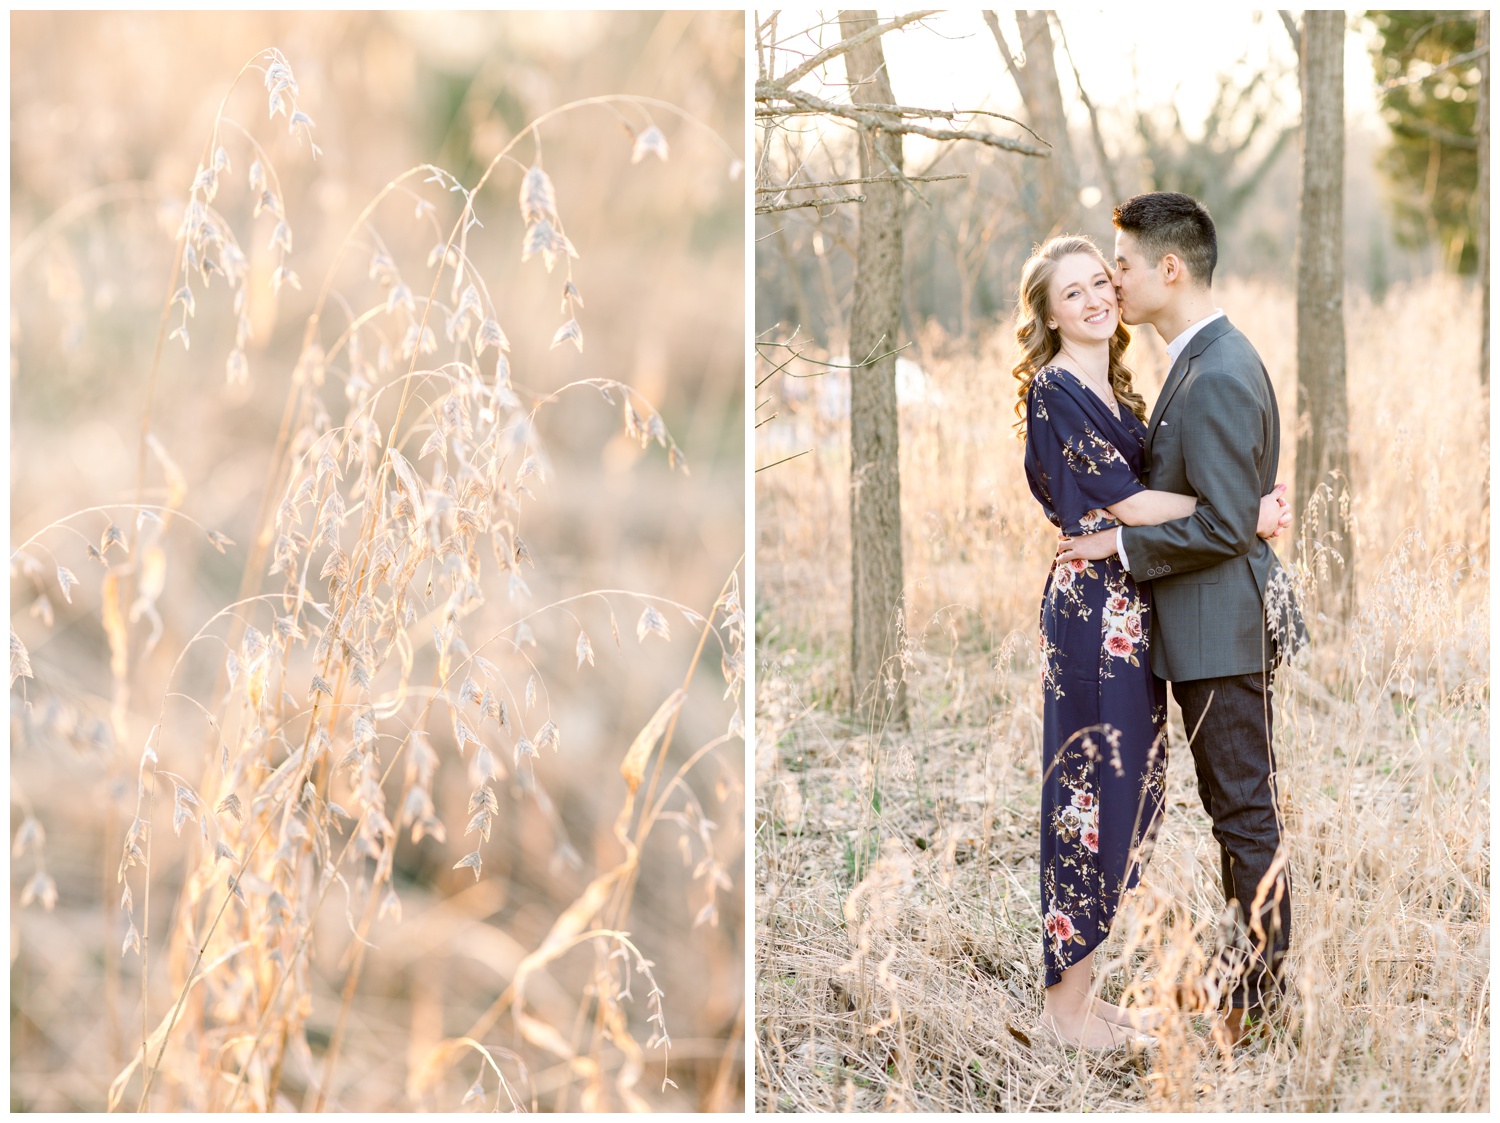 Engaged Couple in Tall Grass at Ault Park